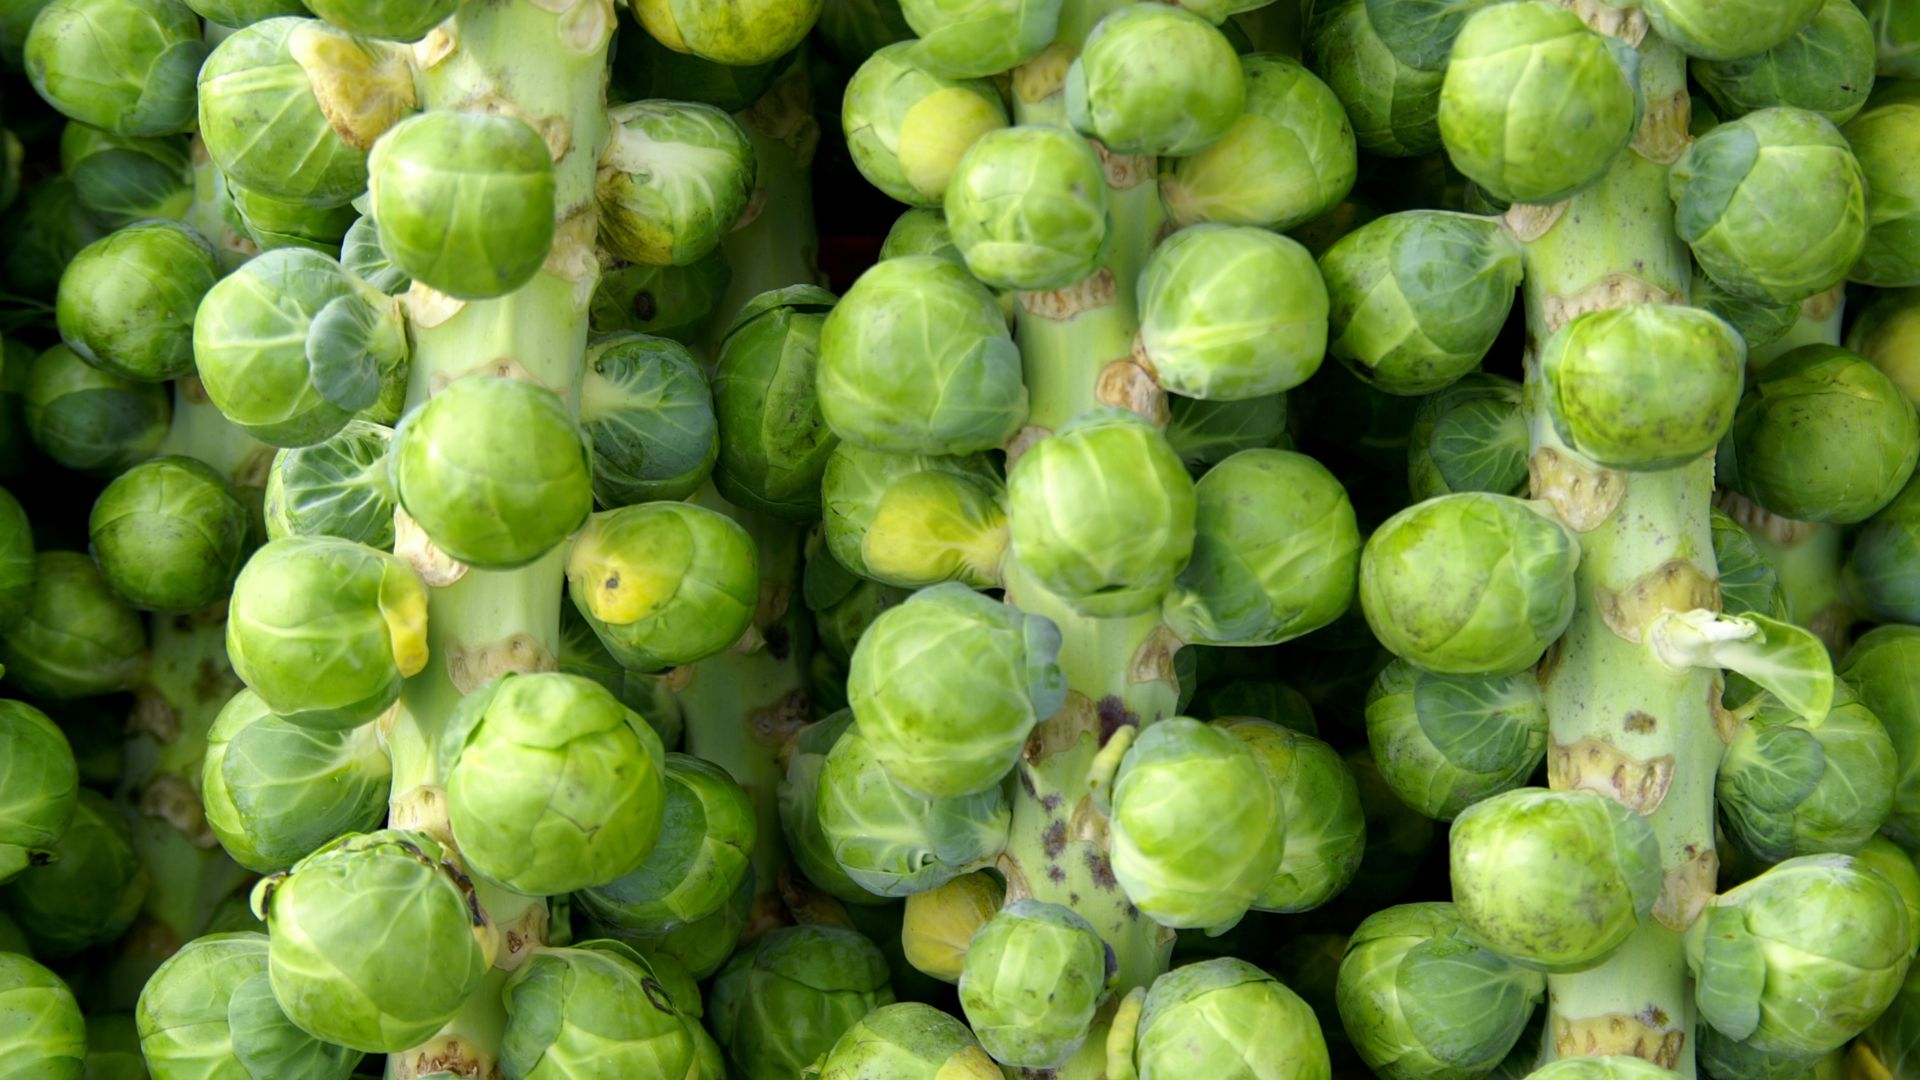 How To Grow Your Own Brussels Sprouts And Get A Bountiful Harvest